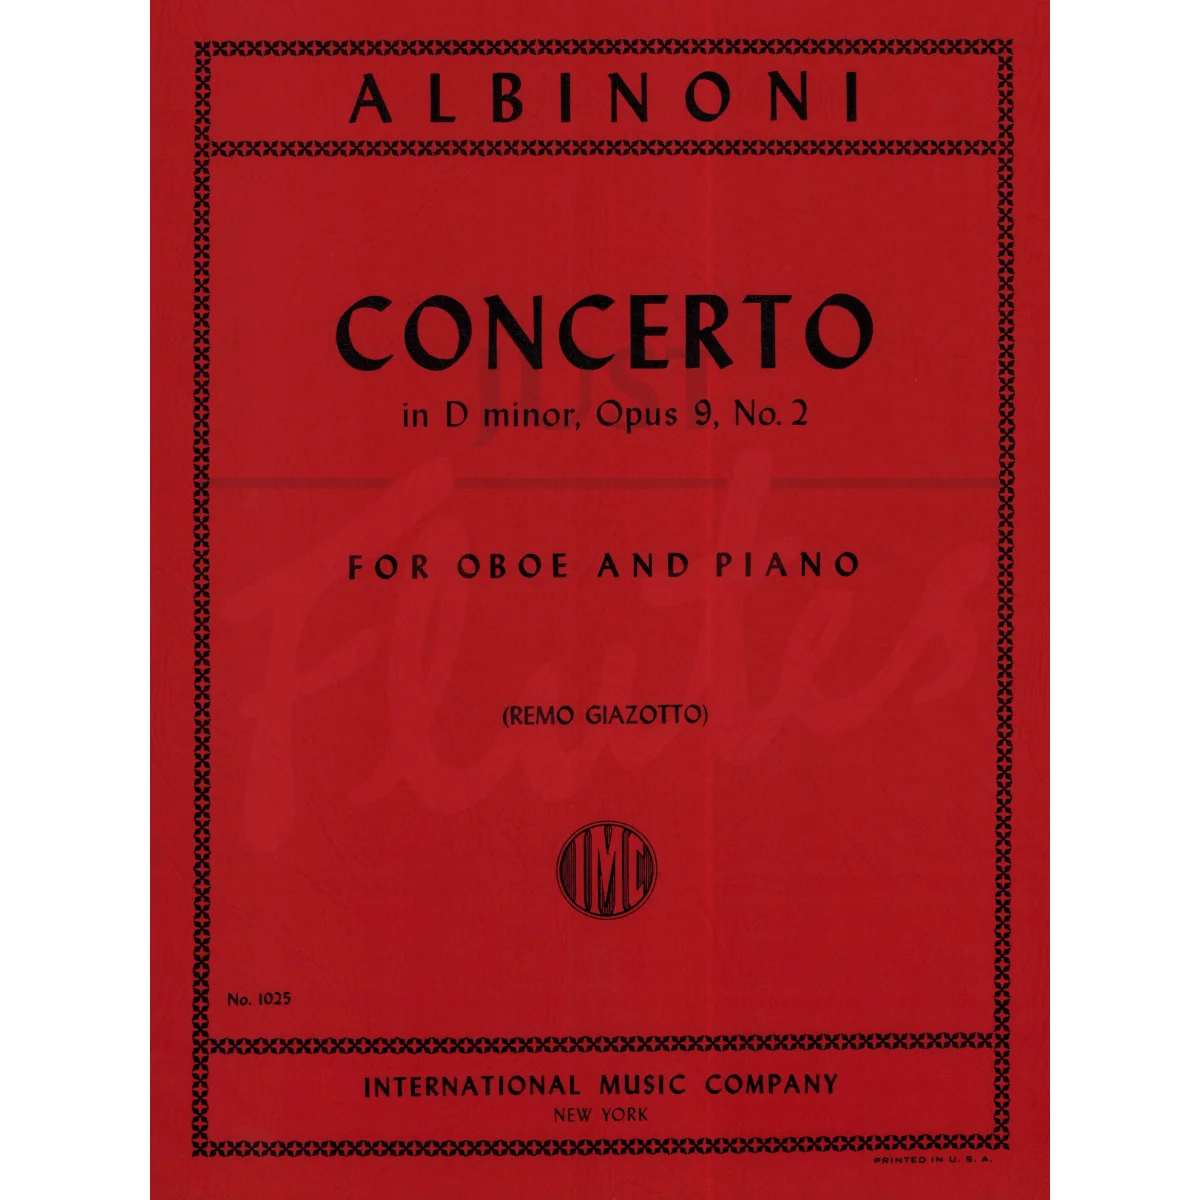 Concerto in D minor for Oboe and Piano